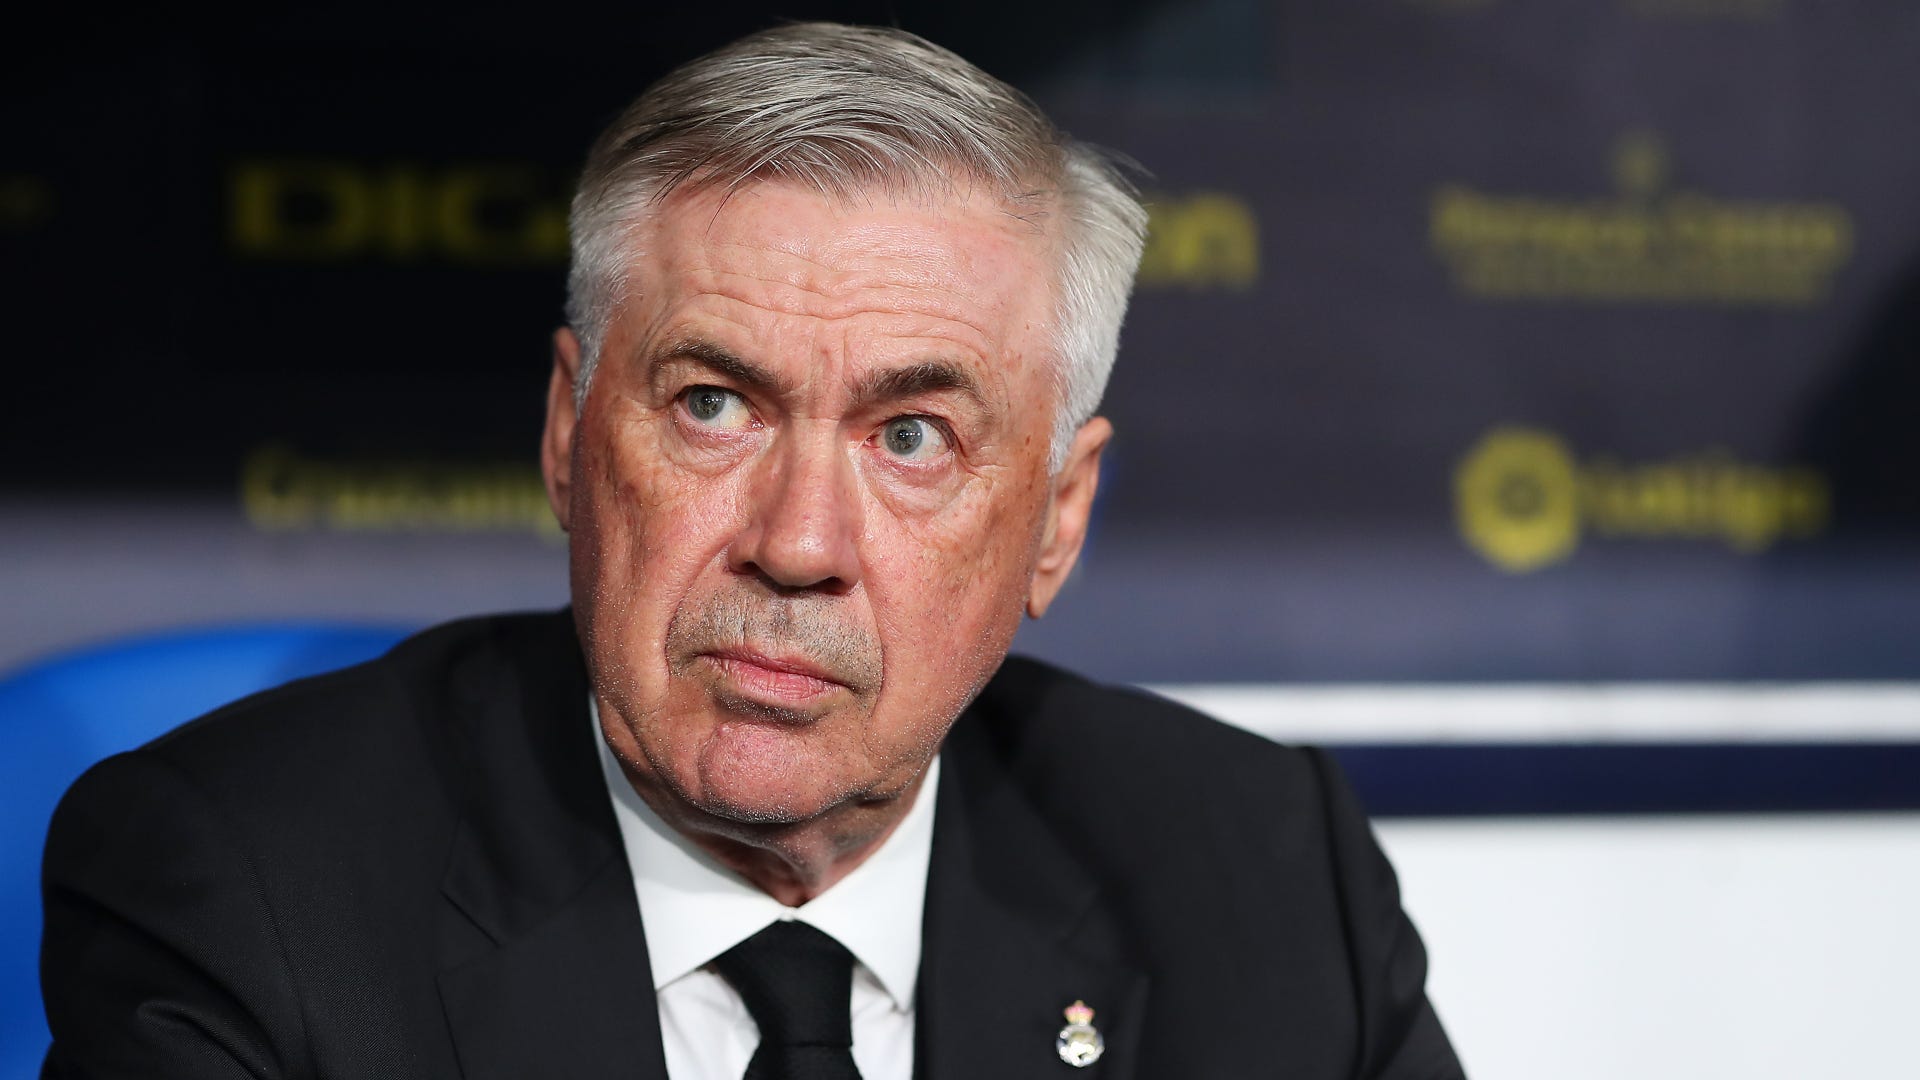 Carlo Ancelotti is heading to Brazil! CBF reaches agreement for Real Madrid  boss to take over men's national team | Goal.com